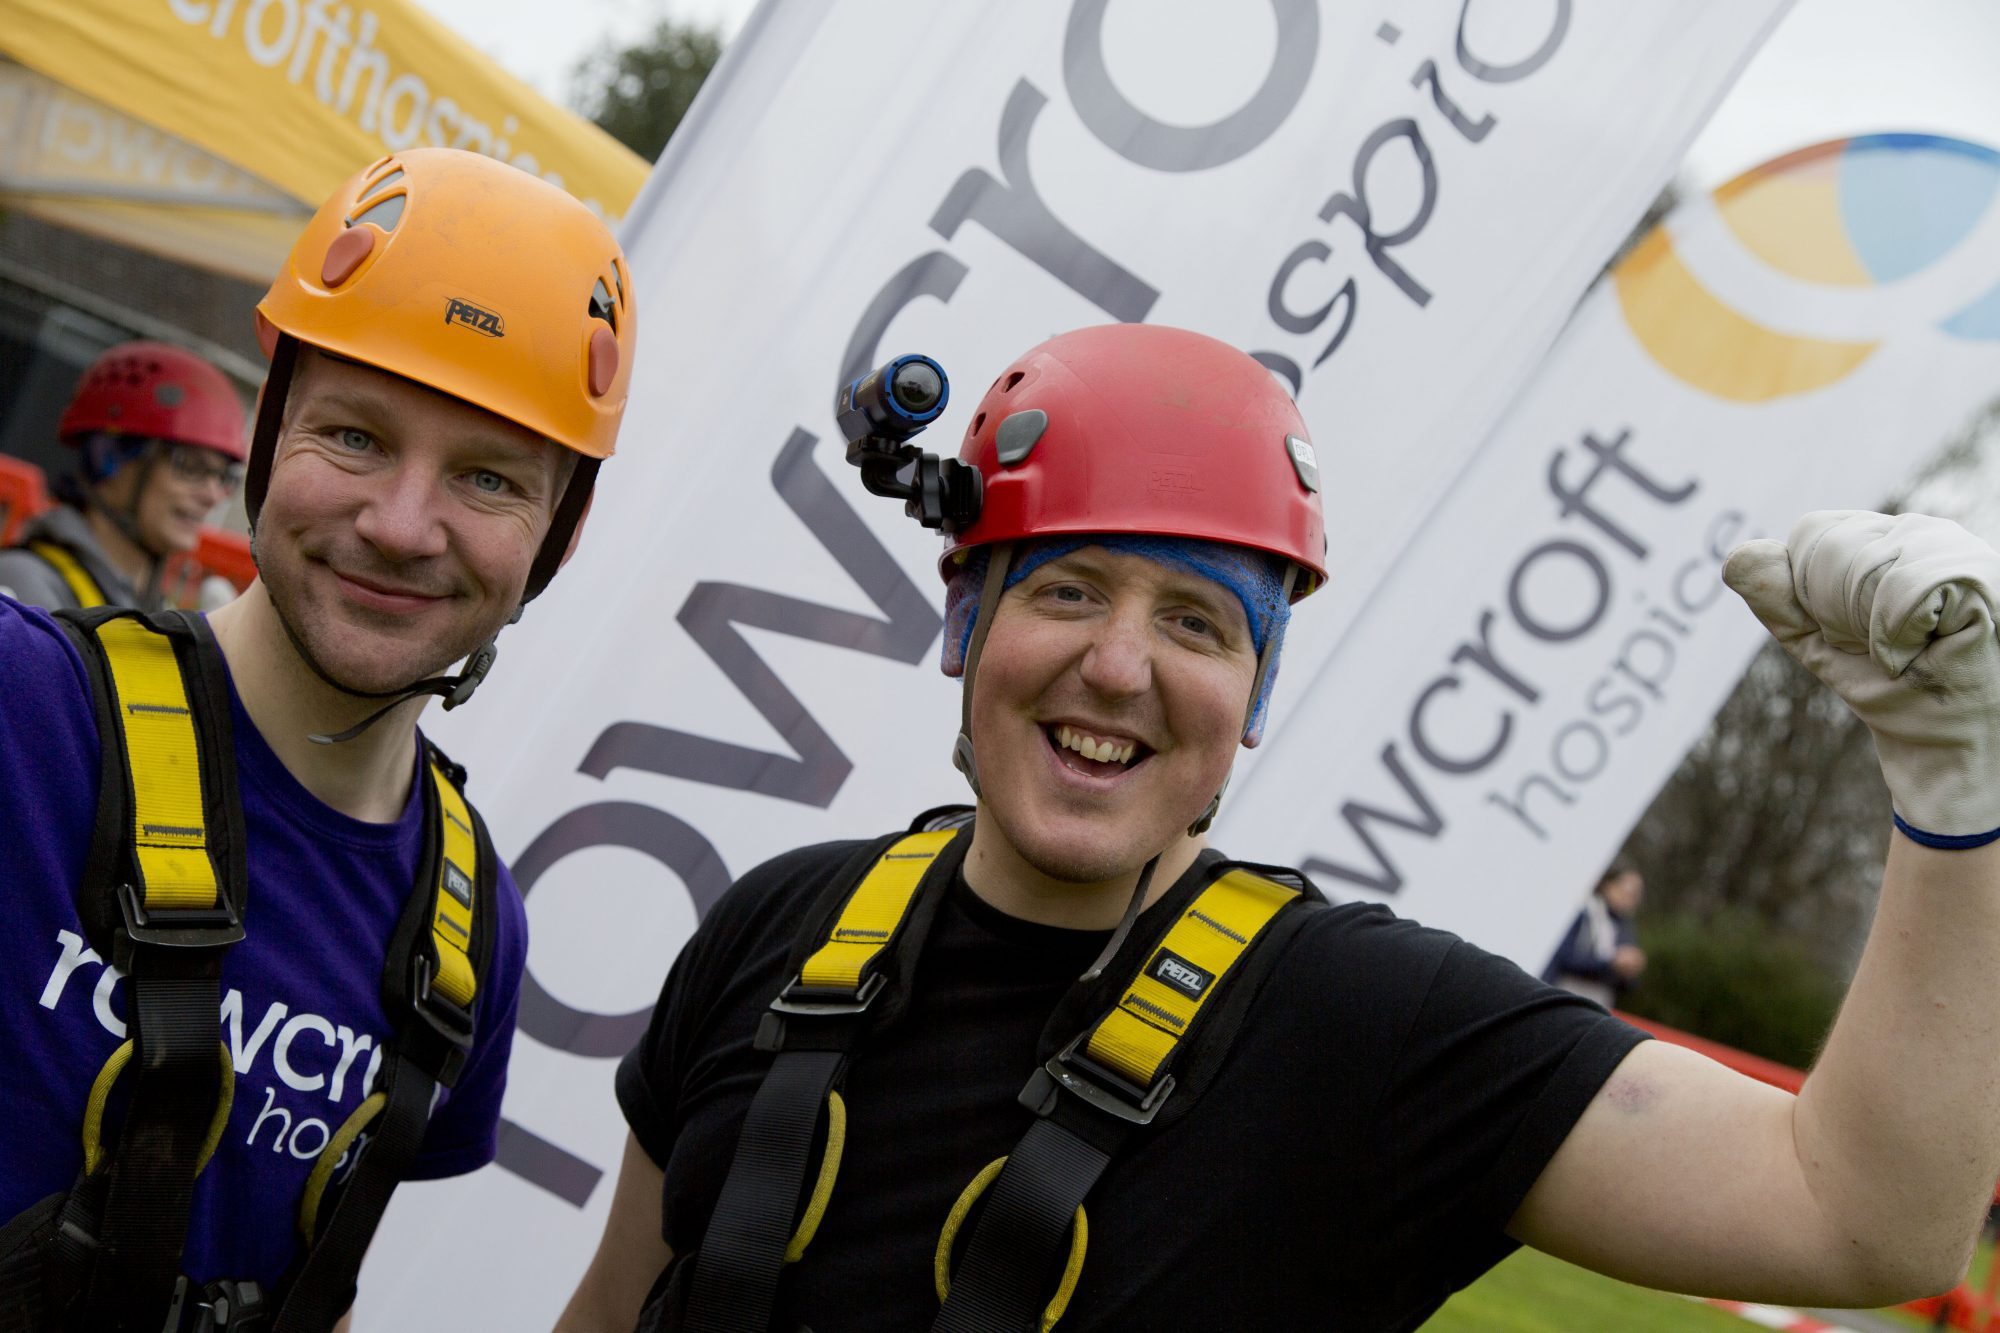 Two fundraisers pose with euorphria after completing an abseil.